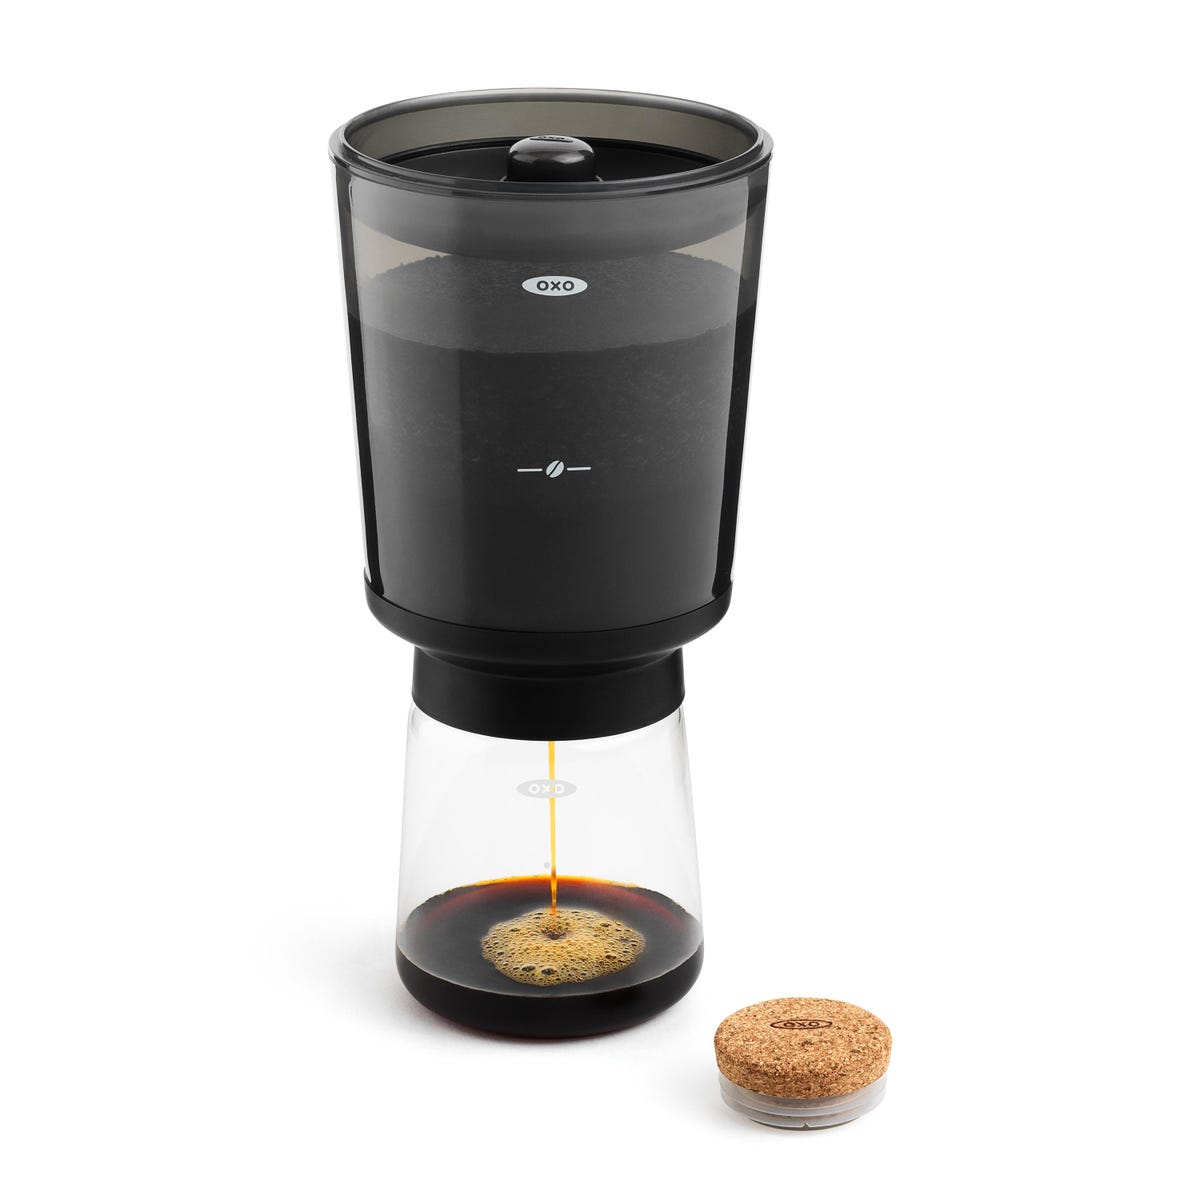 Oxo's pint-size coffee maker brews big or small batches - CNET